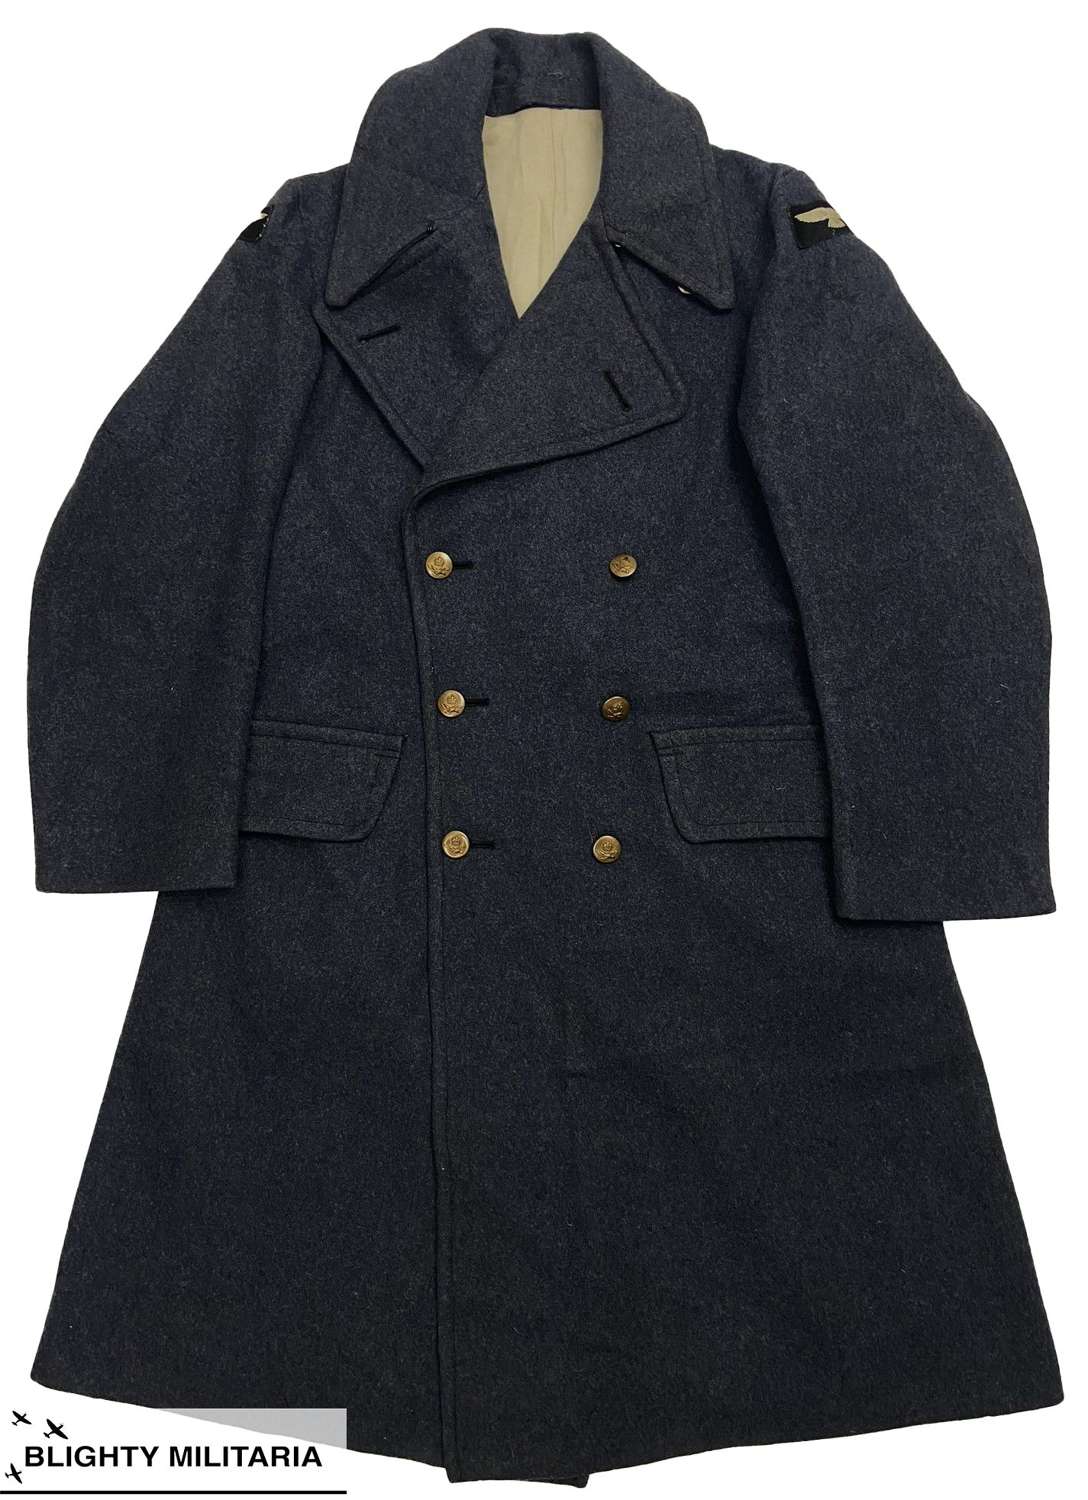 Original 1945 Dated RAF Ordinary Airman's Greatcoat - Size 6